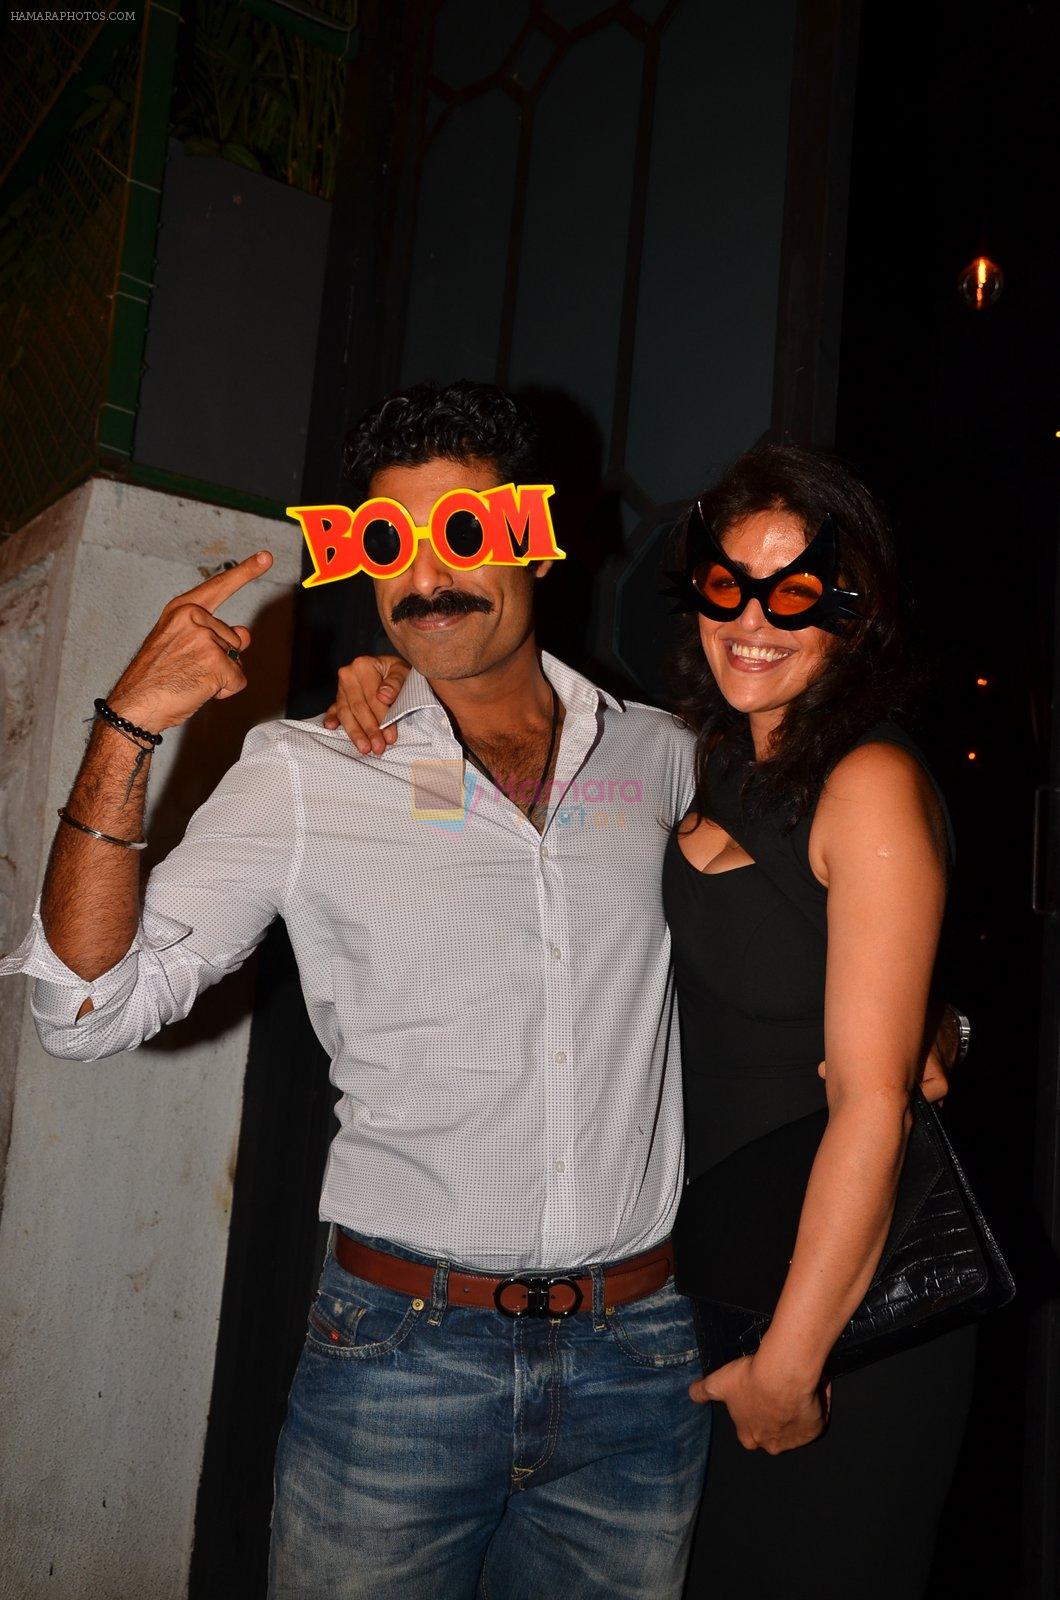 Sikander Kher snapped at NIDO on 1st April 2016